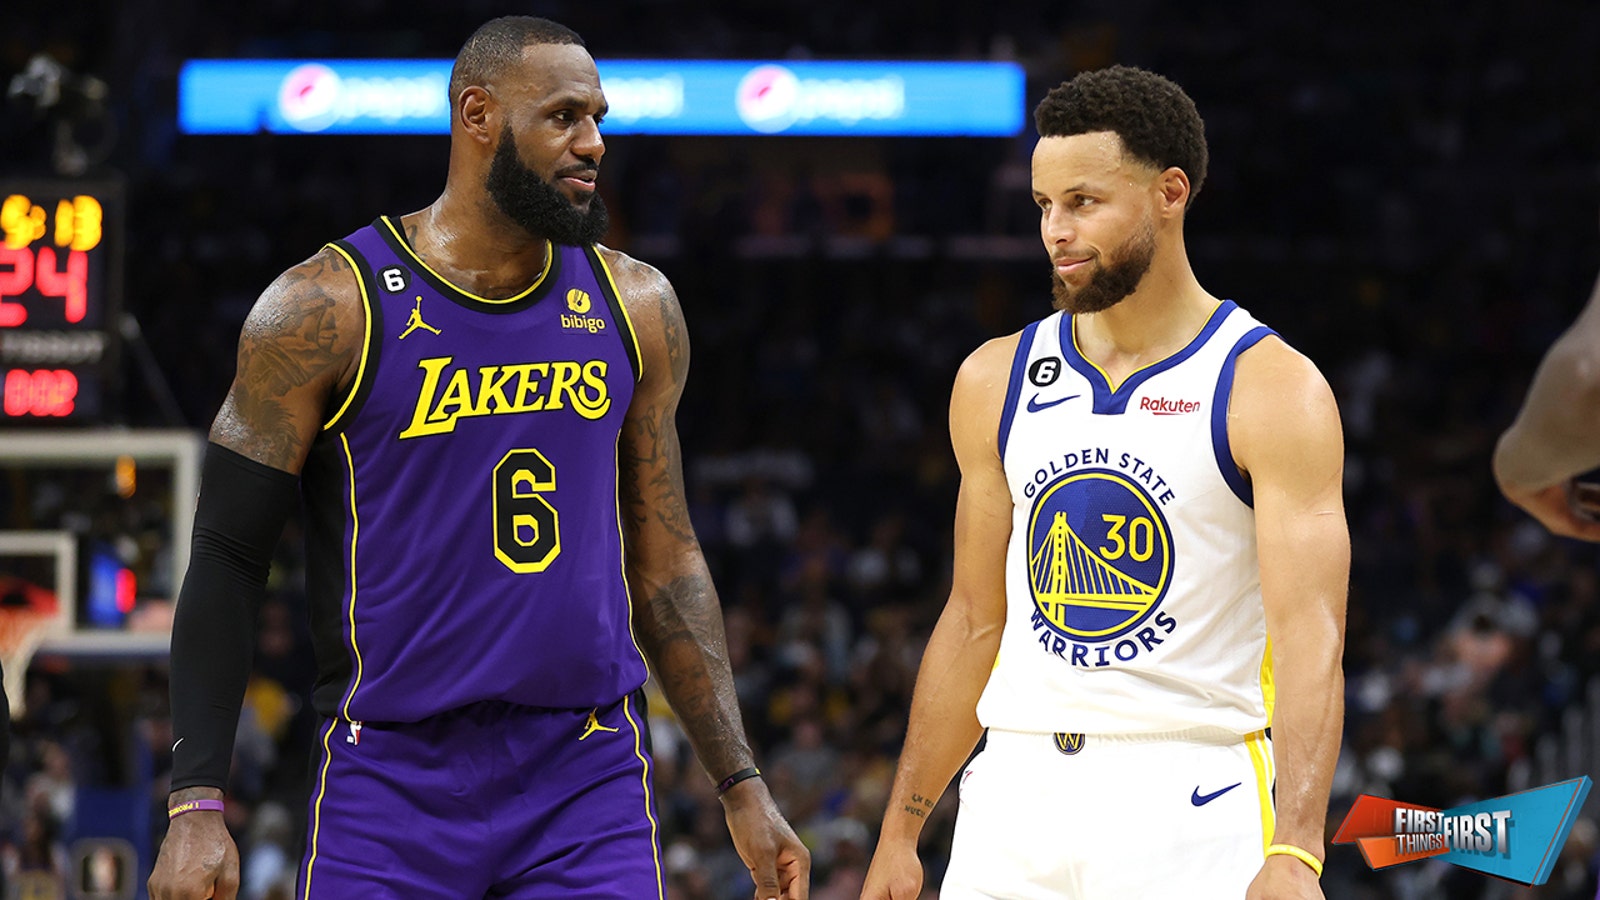 Steph Curry surpasses LeBron James in Nick's latest Player Pyramid